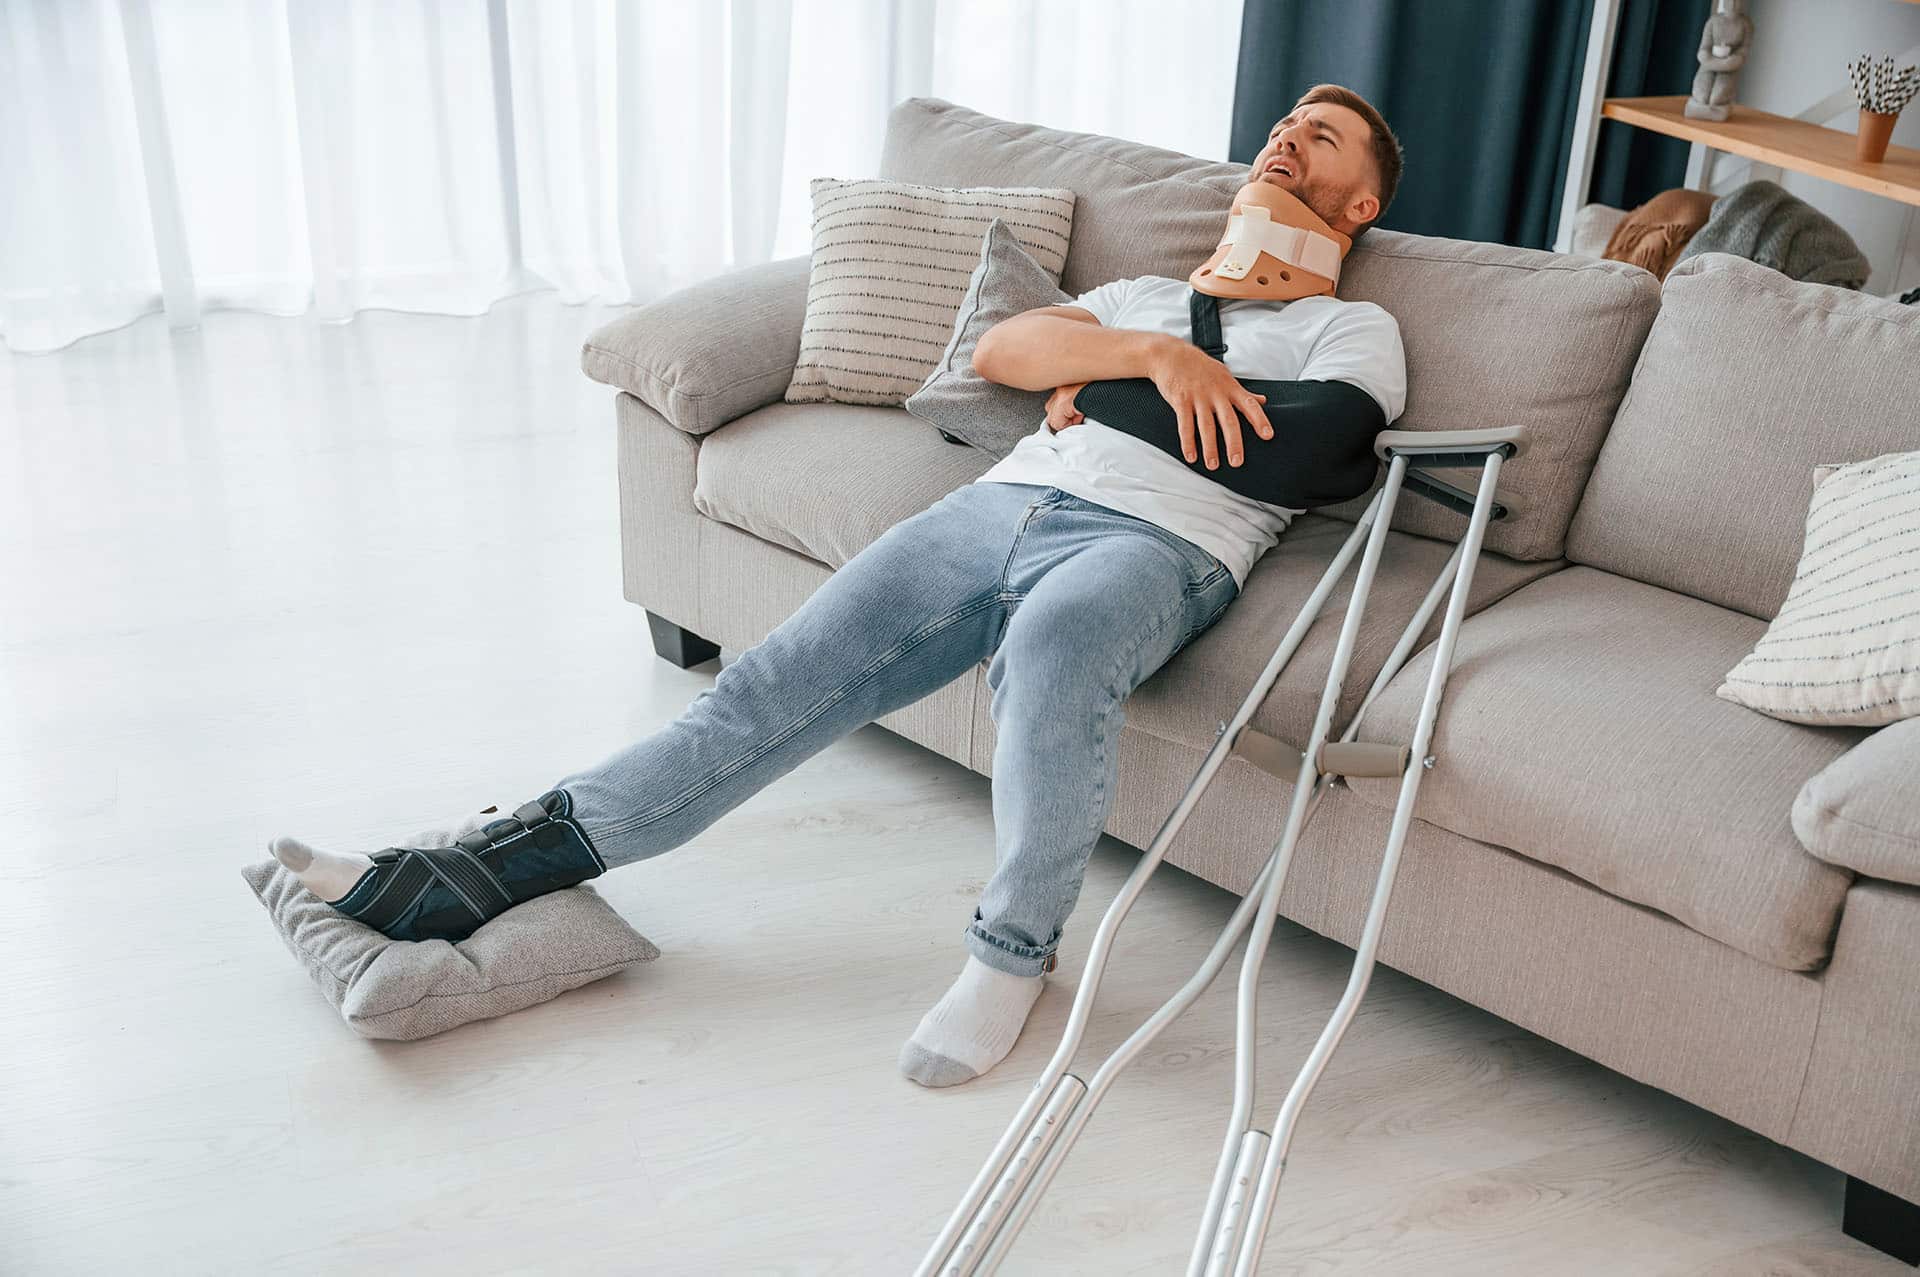 Man with crutches is at home indoors.